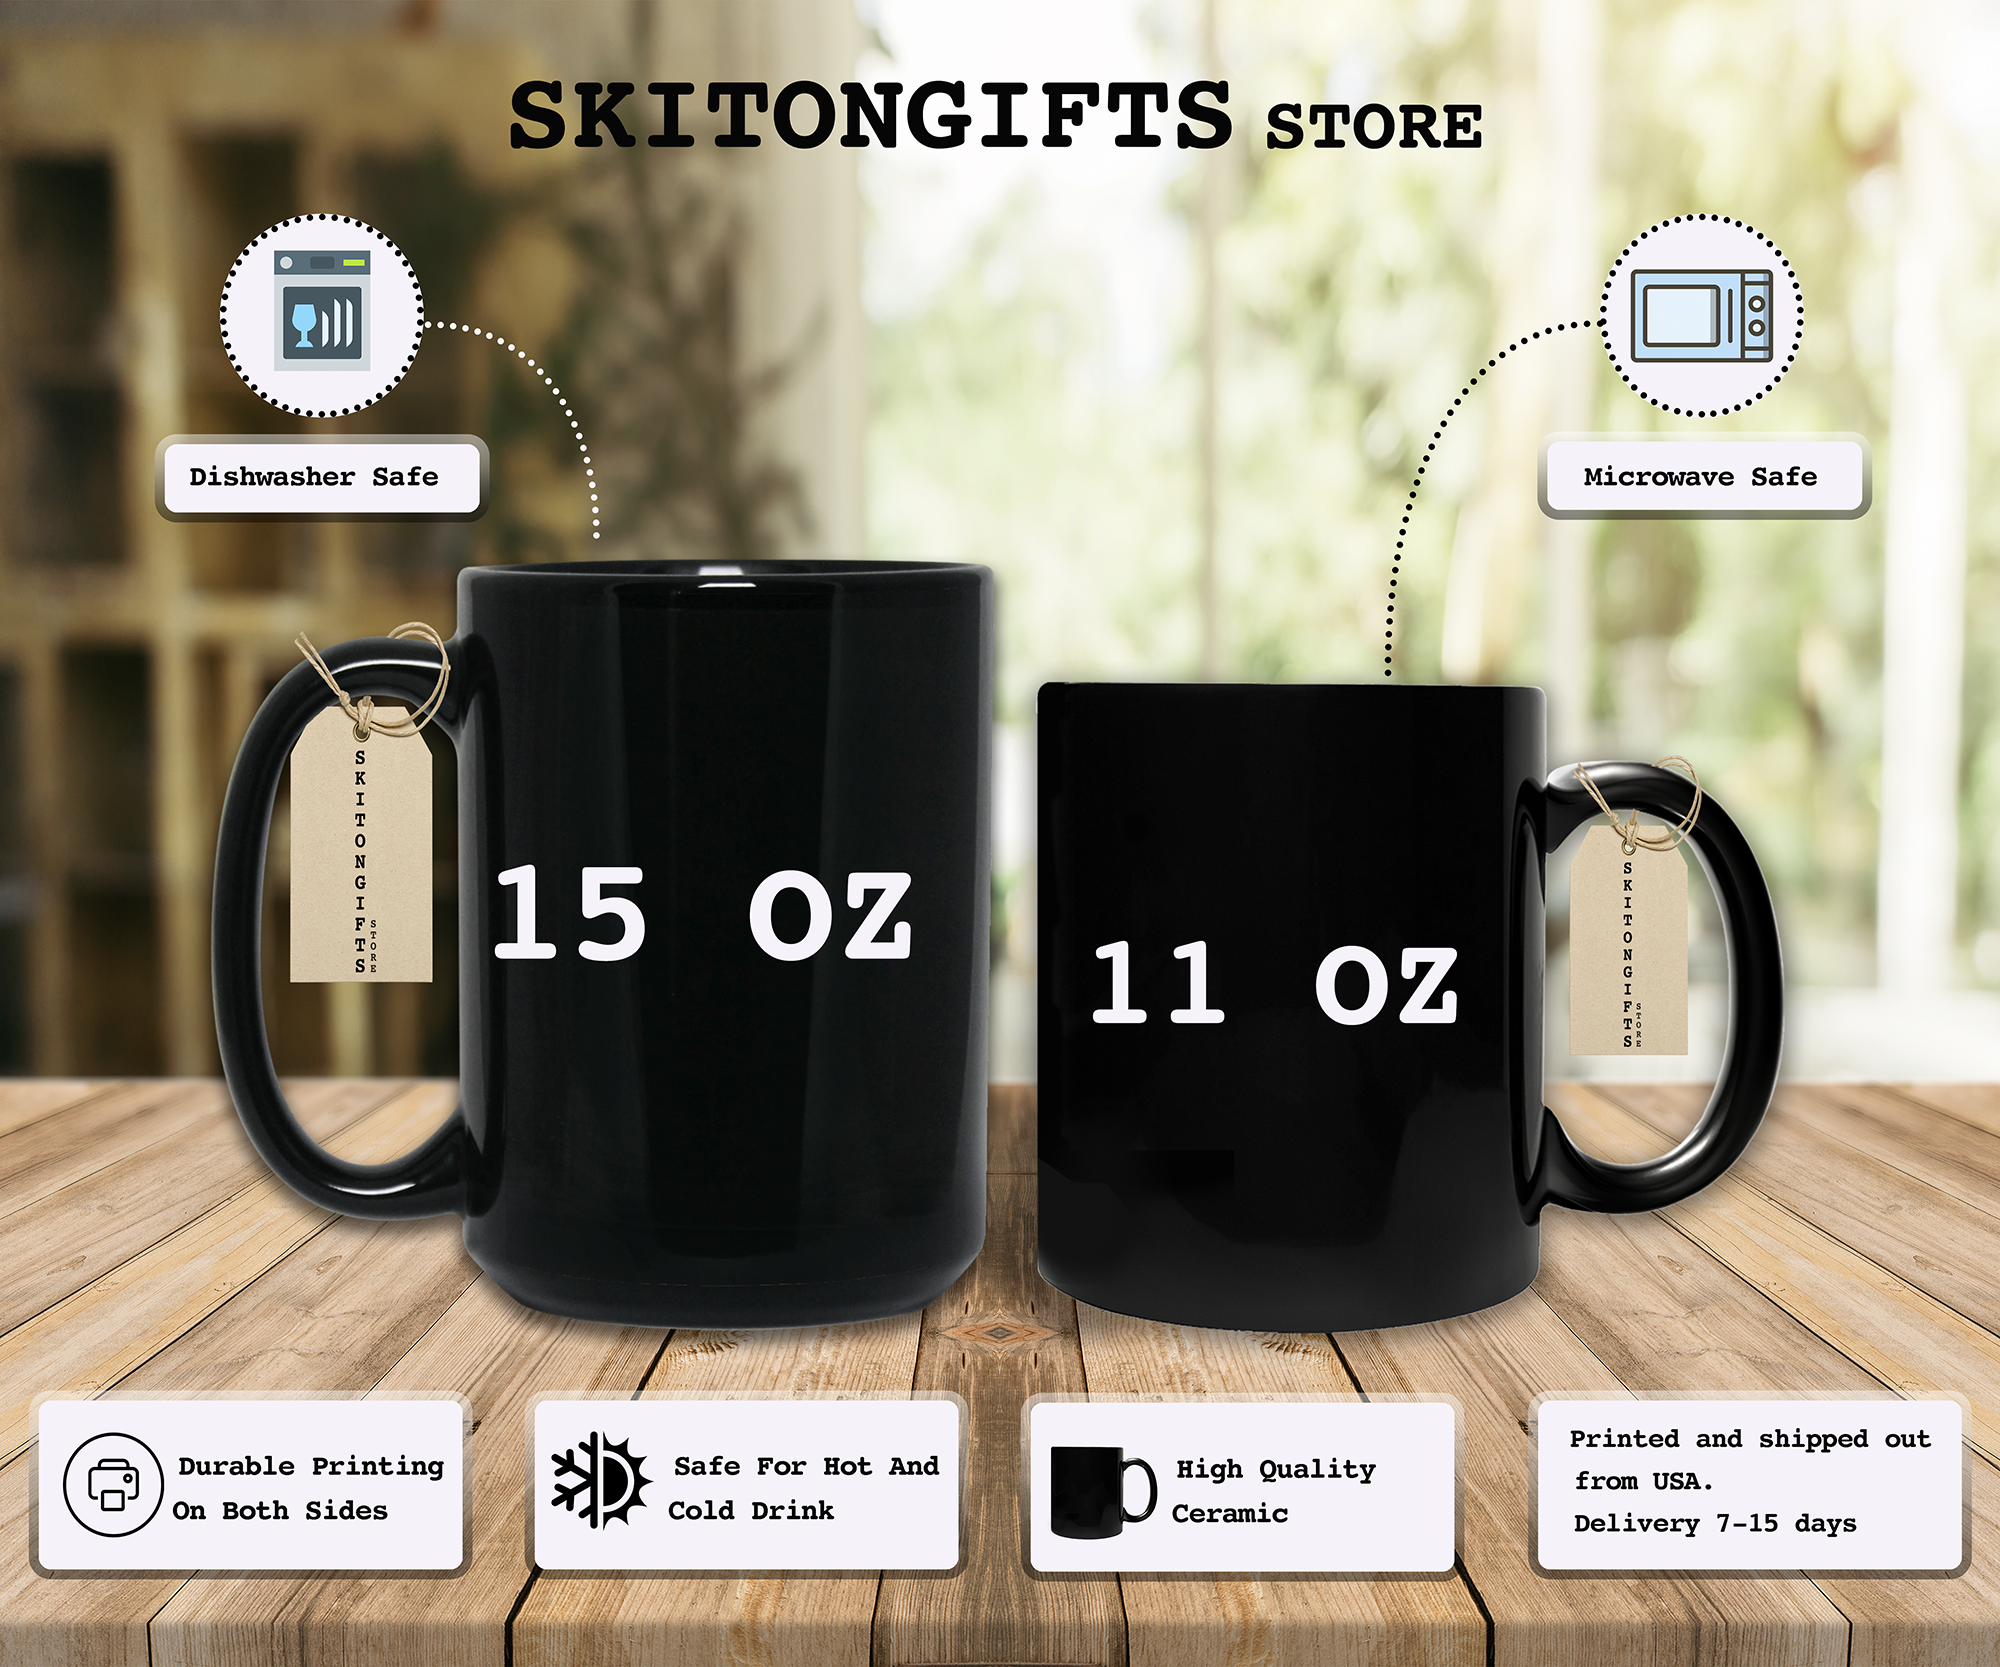 Skitongifts Funny Ceramic Novelty Coffee Mug You Cant Buy Happy But You Can Go Snowboarding... To Snowboarder DnyVNJy